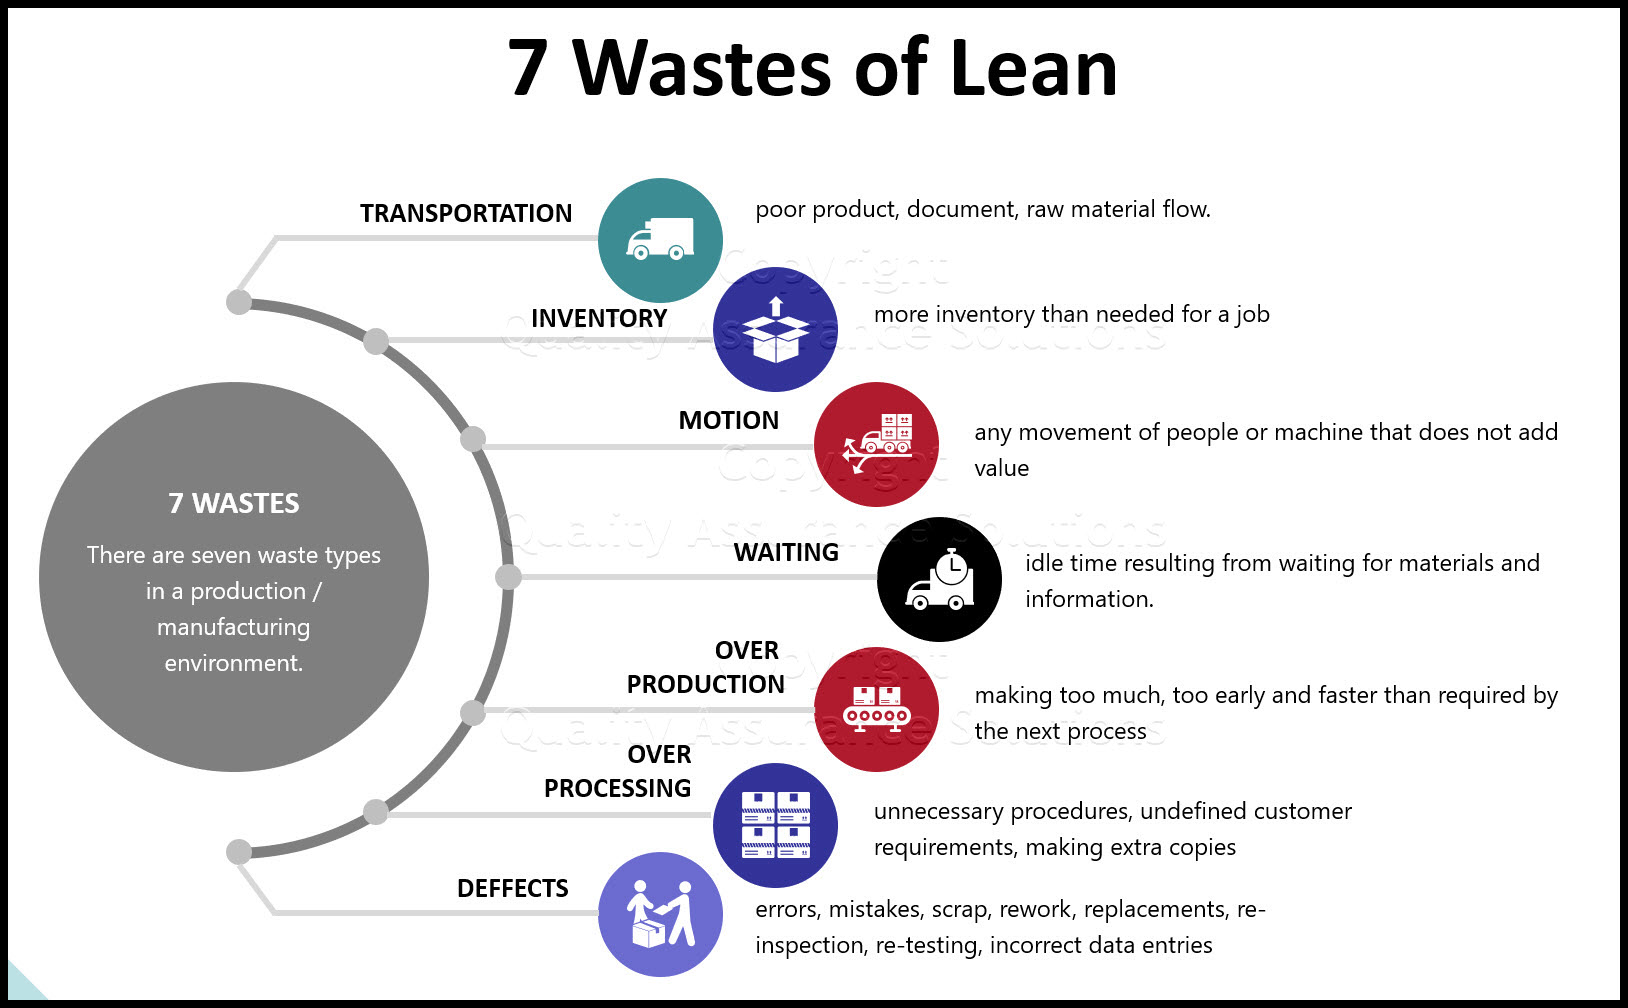 Learn the 7 Wastes of Lean with this article. 